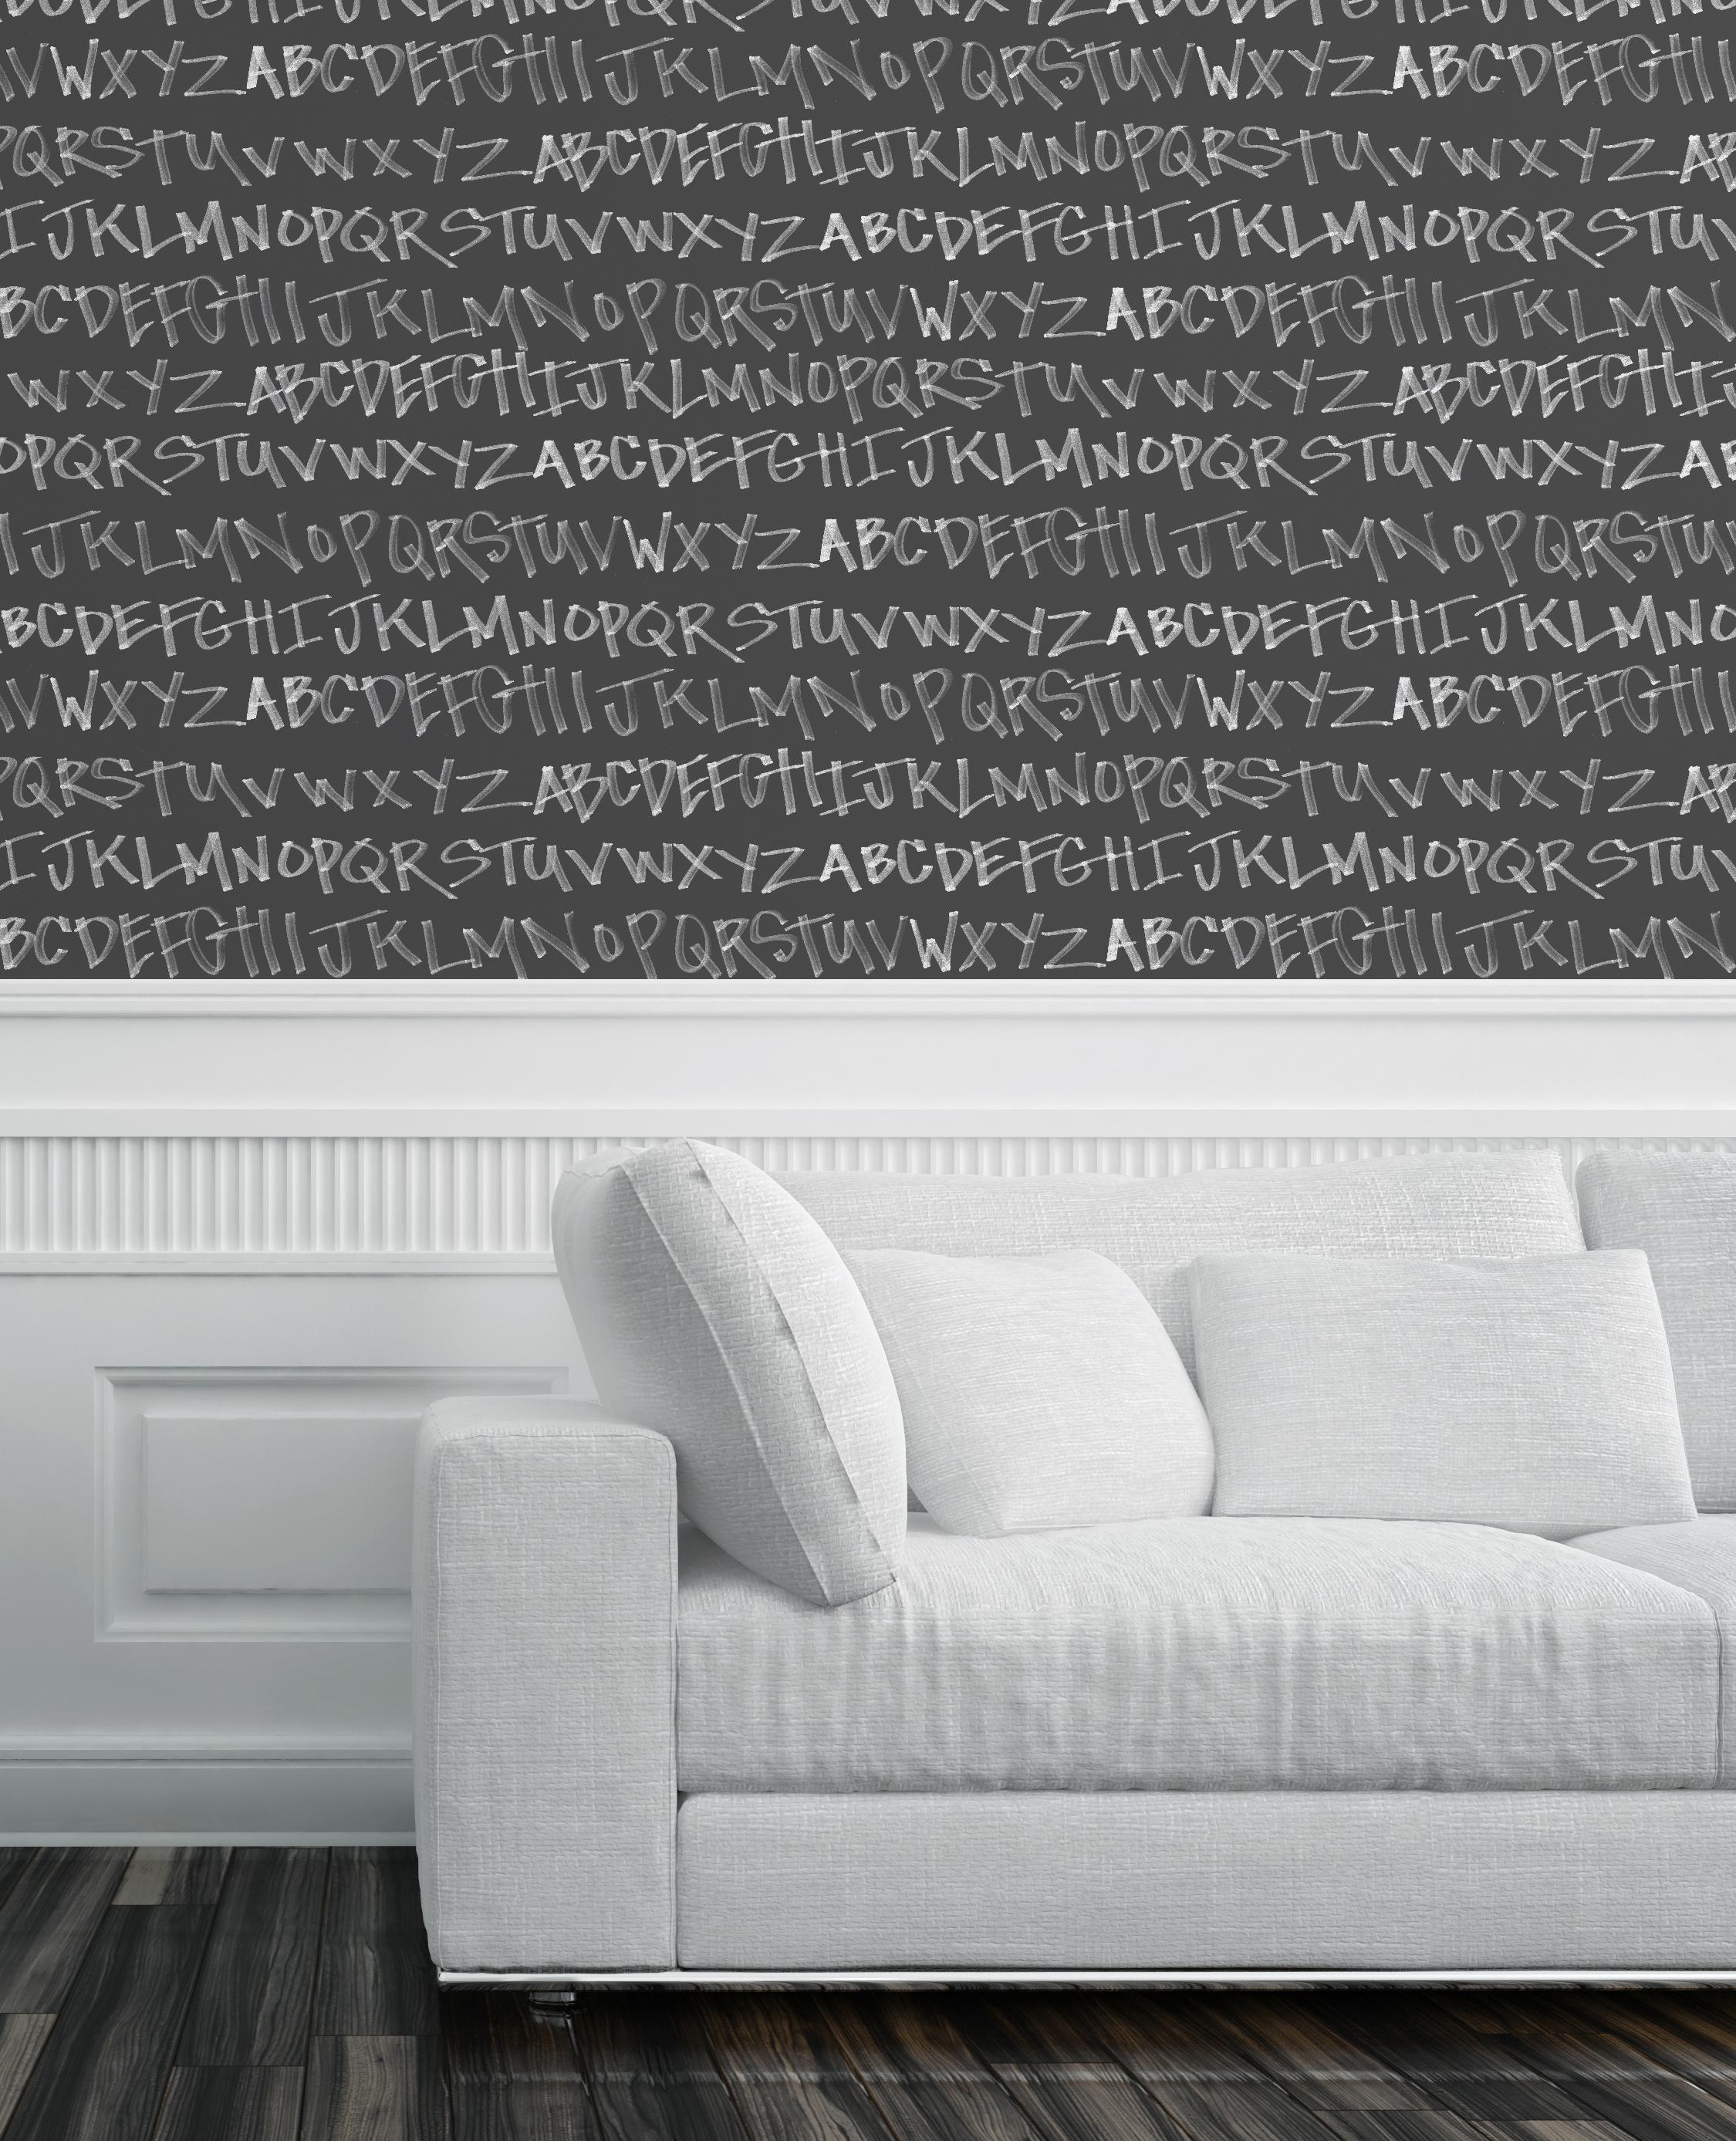 Modern NYC Alphabet in Chalkboard Colorway on Smooth Wallpaper For Sale